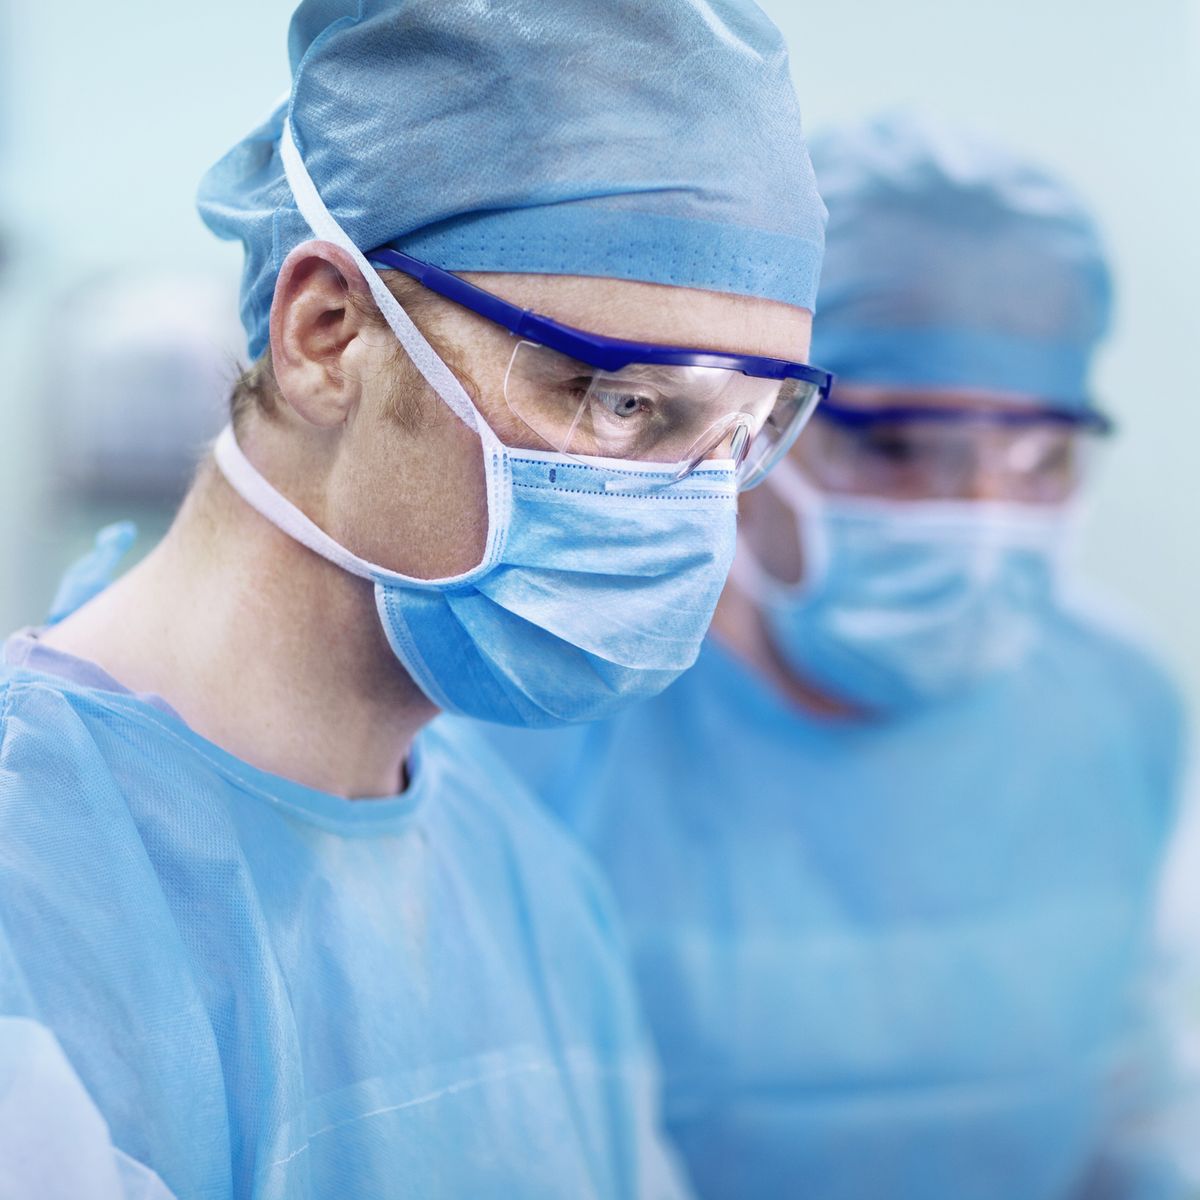 Doctor looking at surgical table in operating room